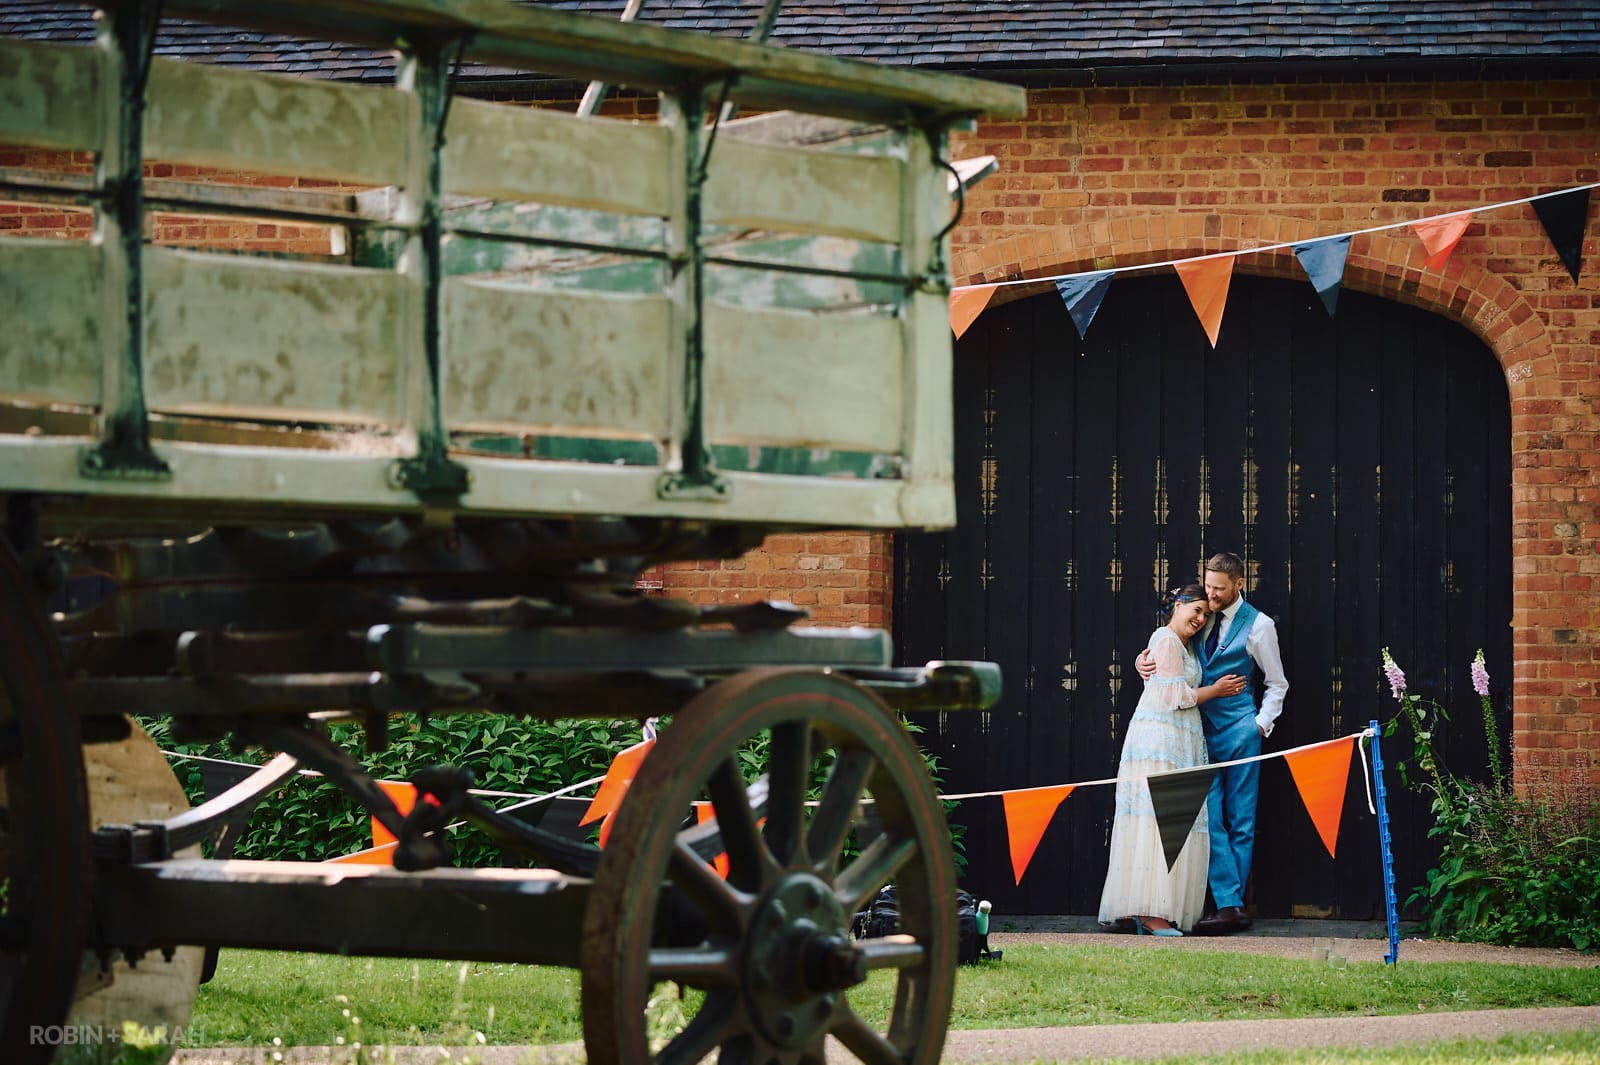 Bride and groom share a quite moment together amongst the old buildings at Avoncroft Museum.